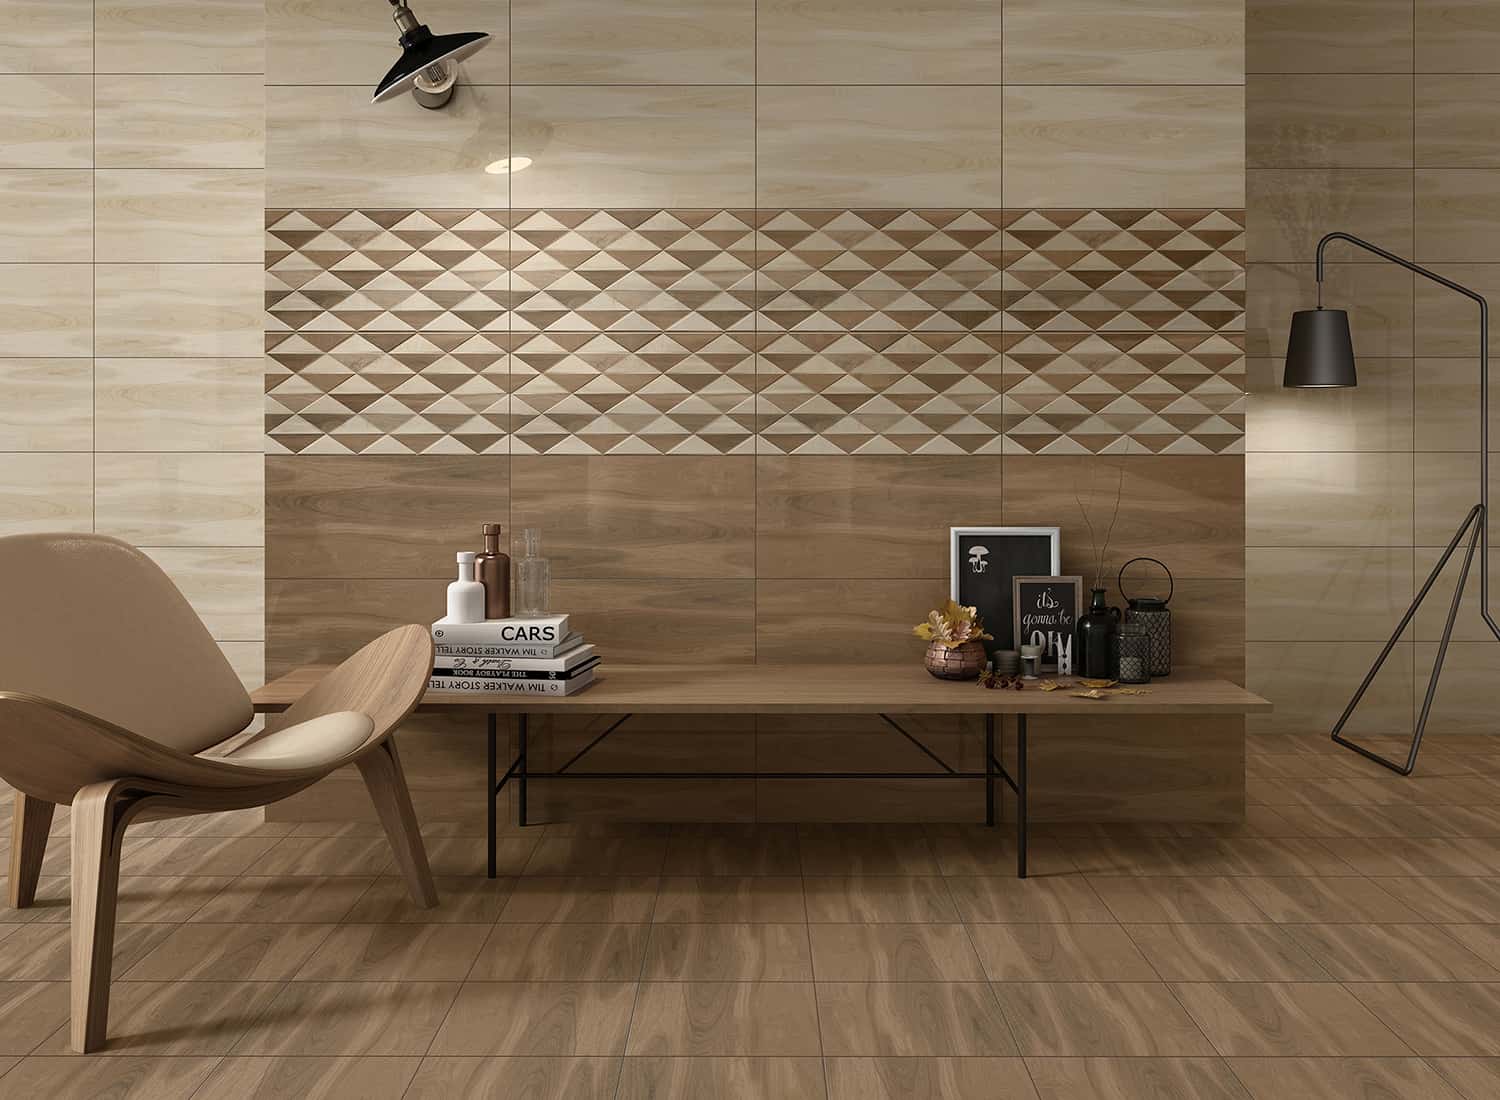 Qutone tiles catalogue products come in affordable price, as per their 2022 list and have the best reviews.